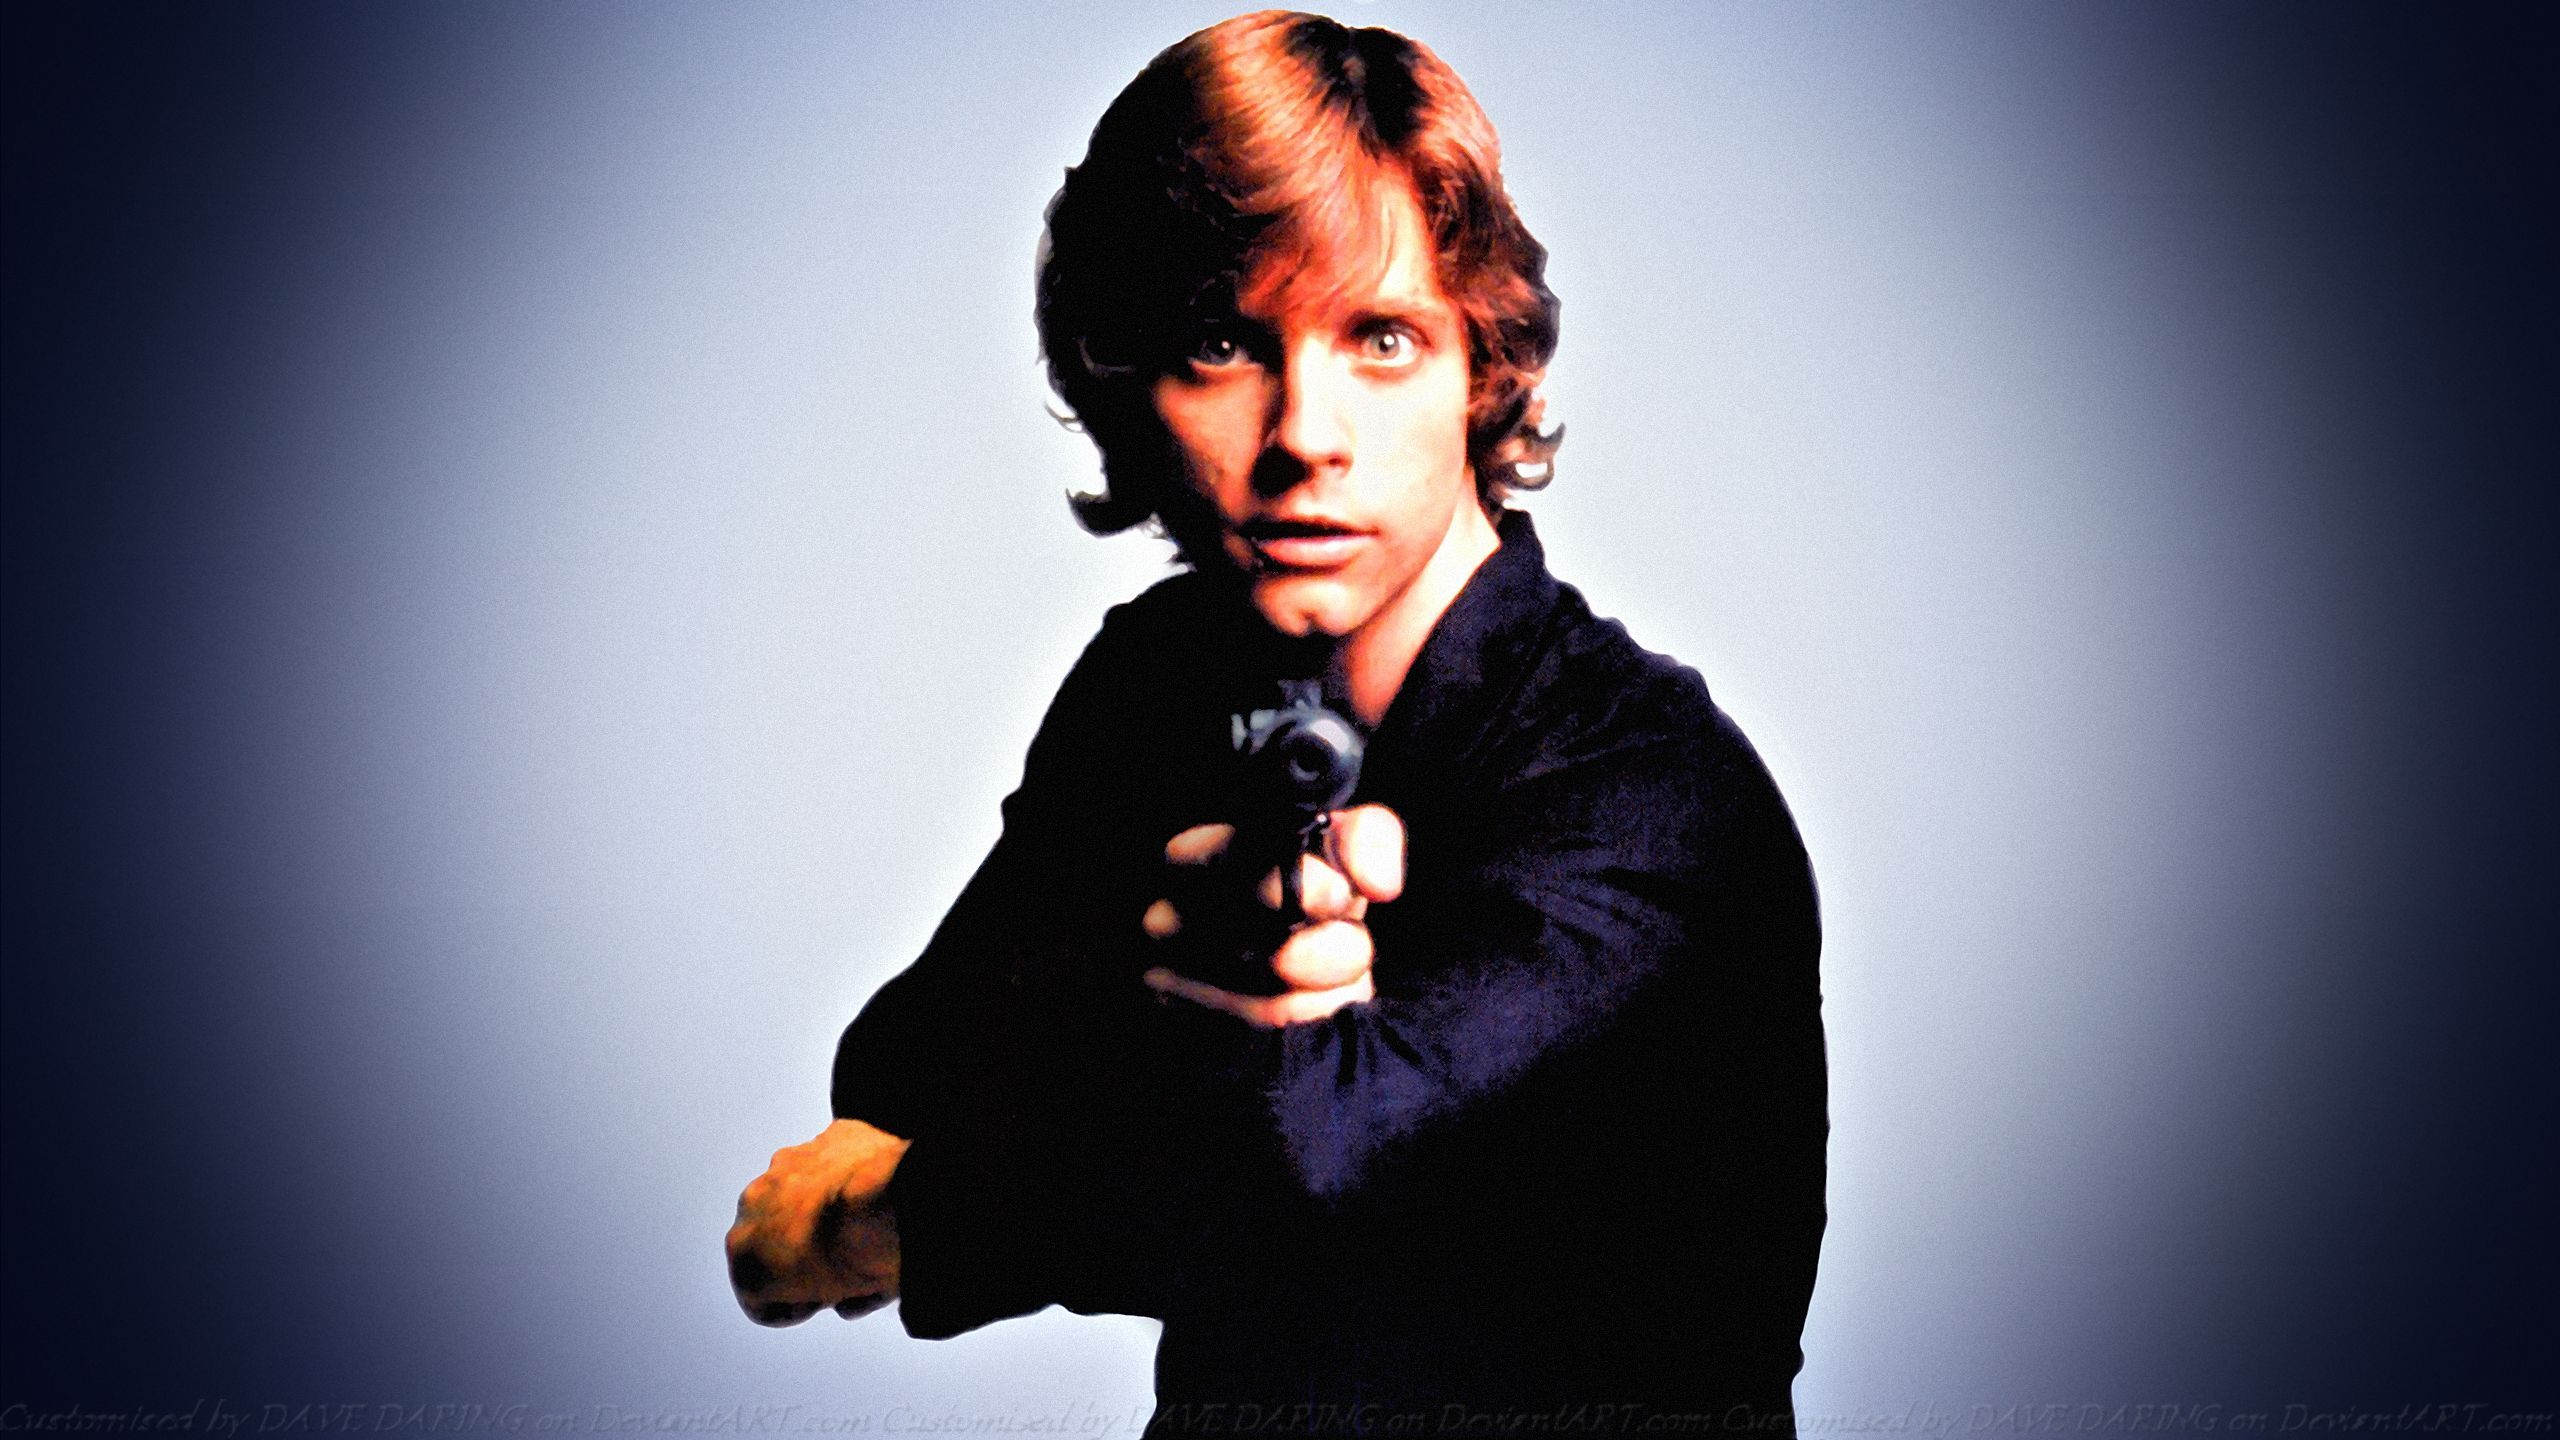 Free download Mark Hamill Wallpaper High Resolution and Quality Download [2560x1440] for your Desktop, Mobile & Tablet. Explore Mark Hamill Wallpaper. Mark Hamill Wallpaper, Question Mark Wallpaper, Mark Ingram Wallpaper